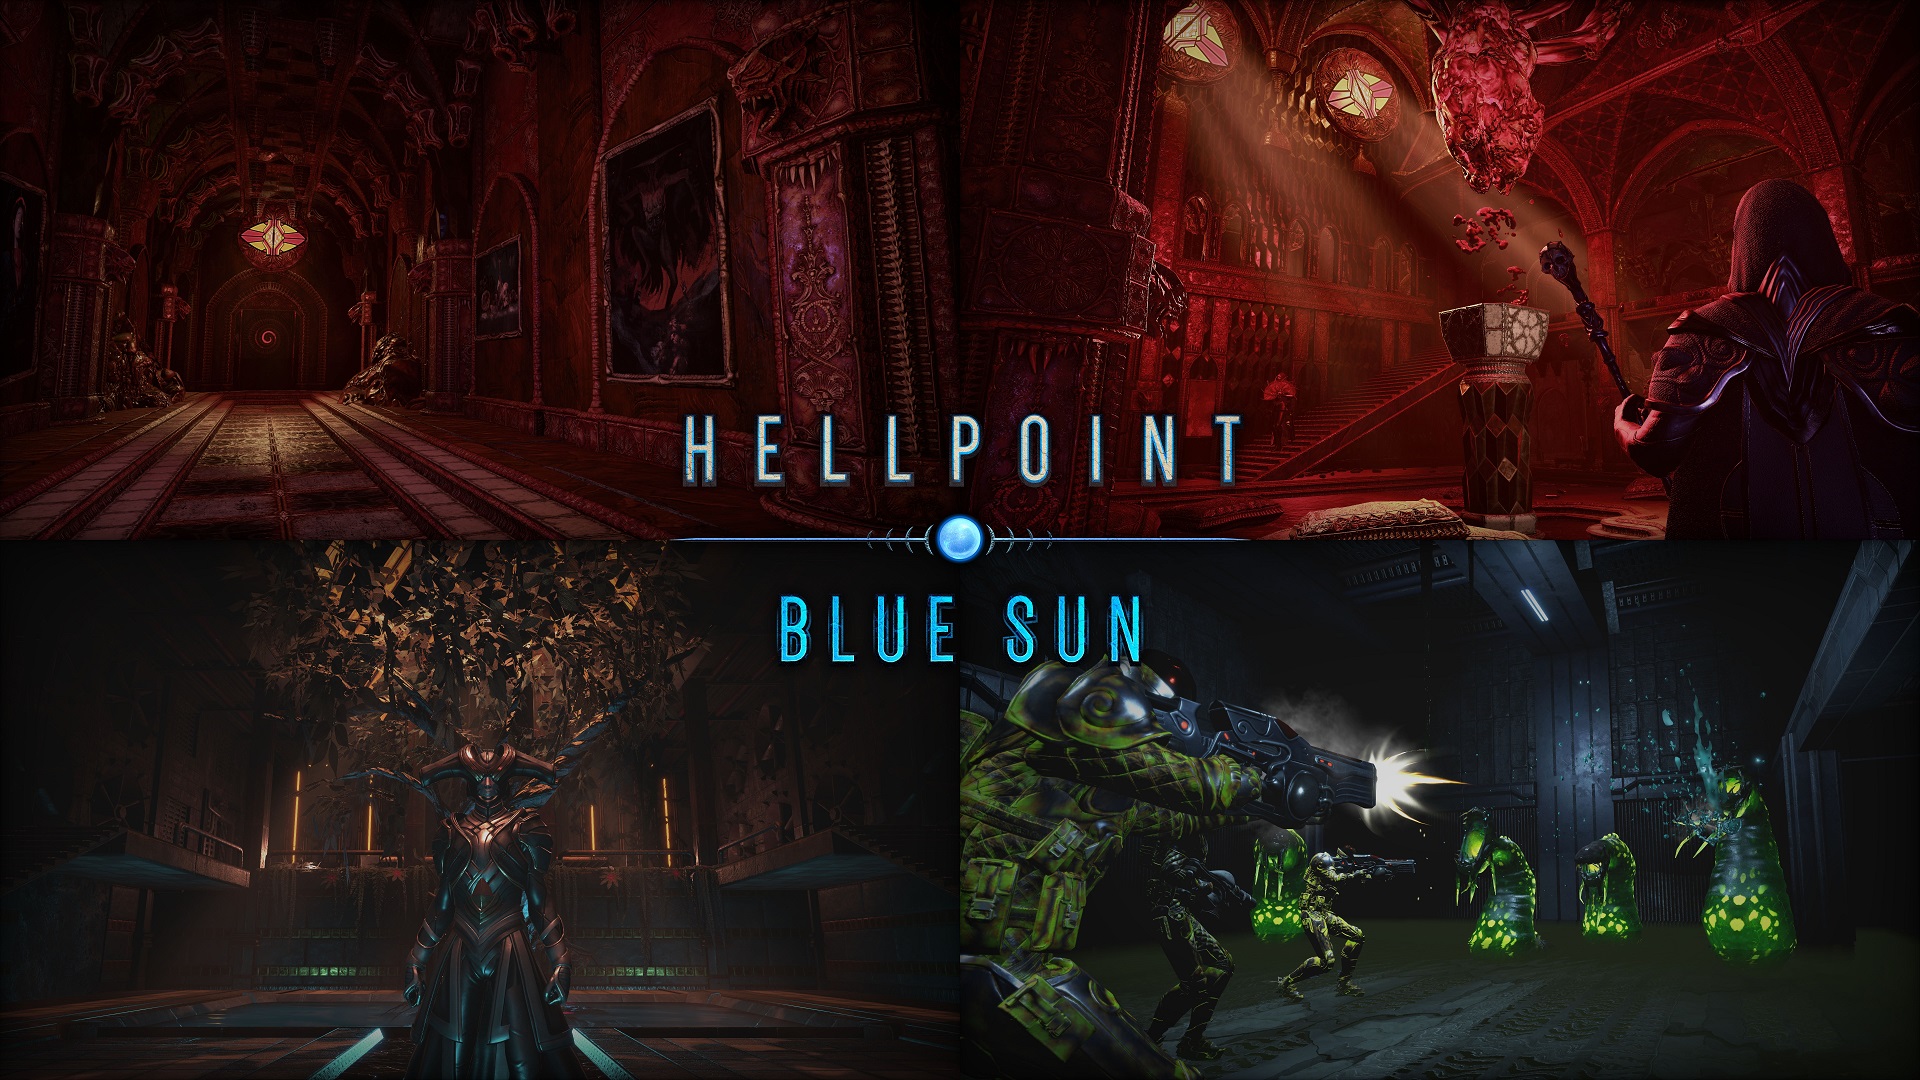 Hellpoint is coming to next-gen consoles